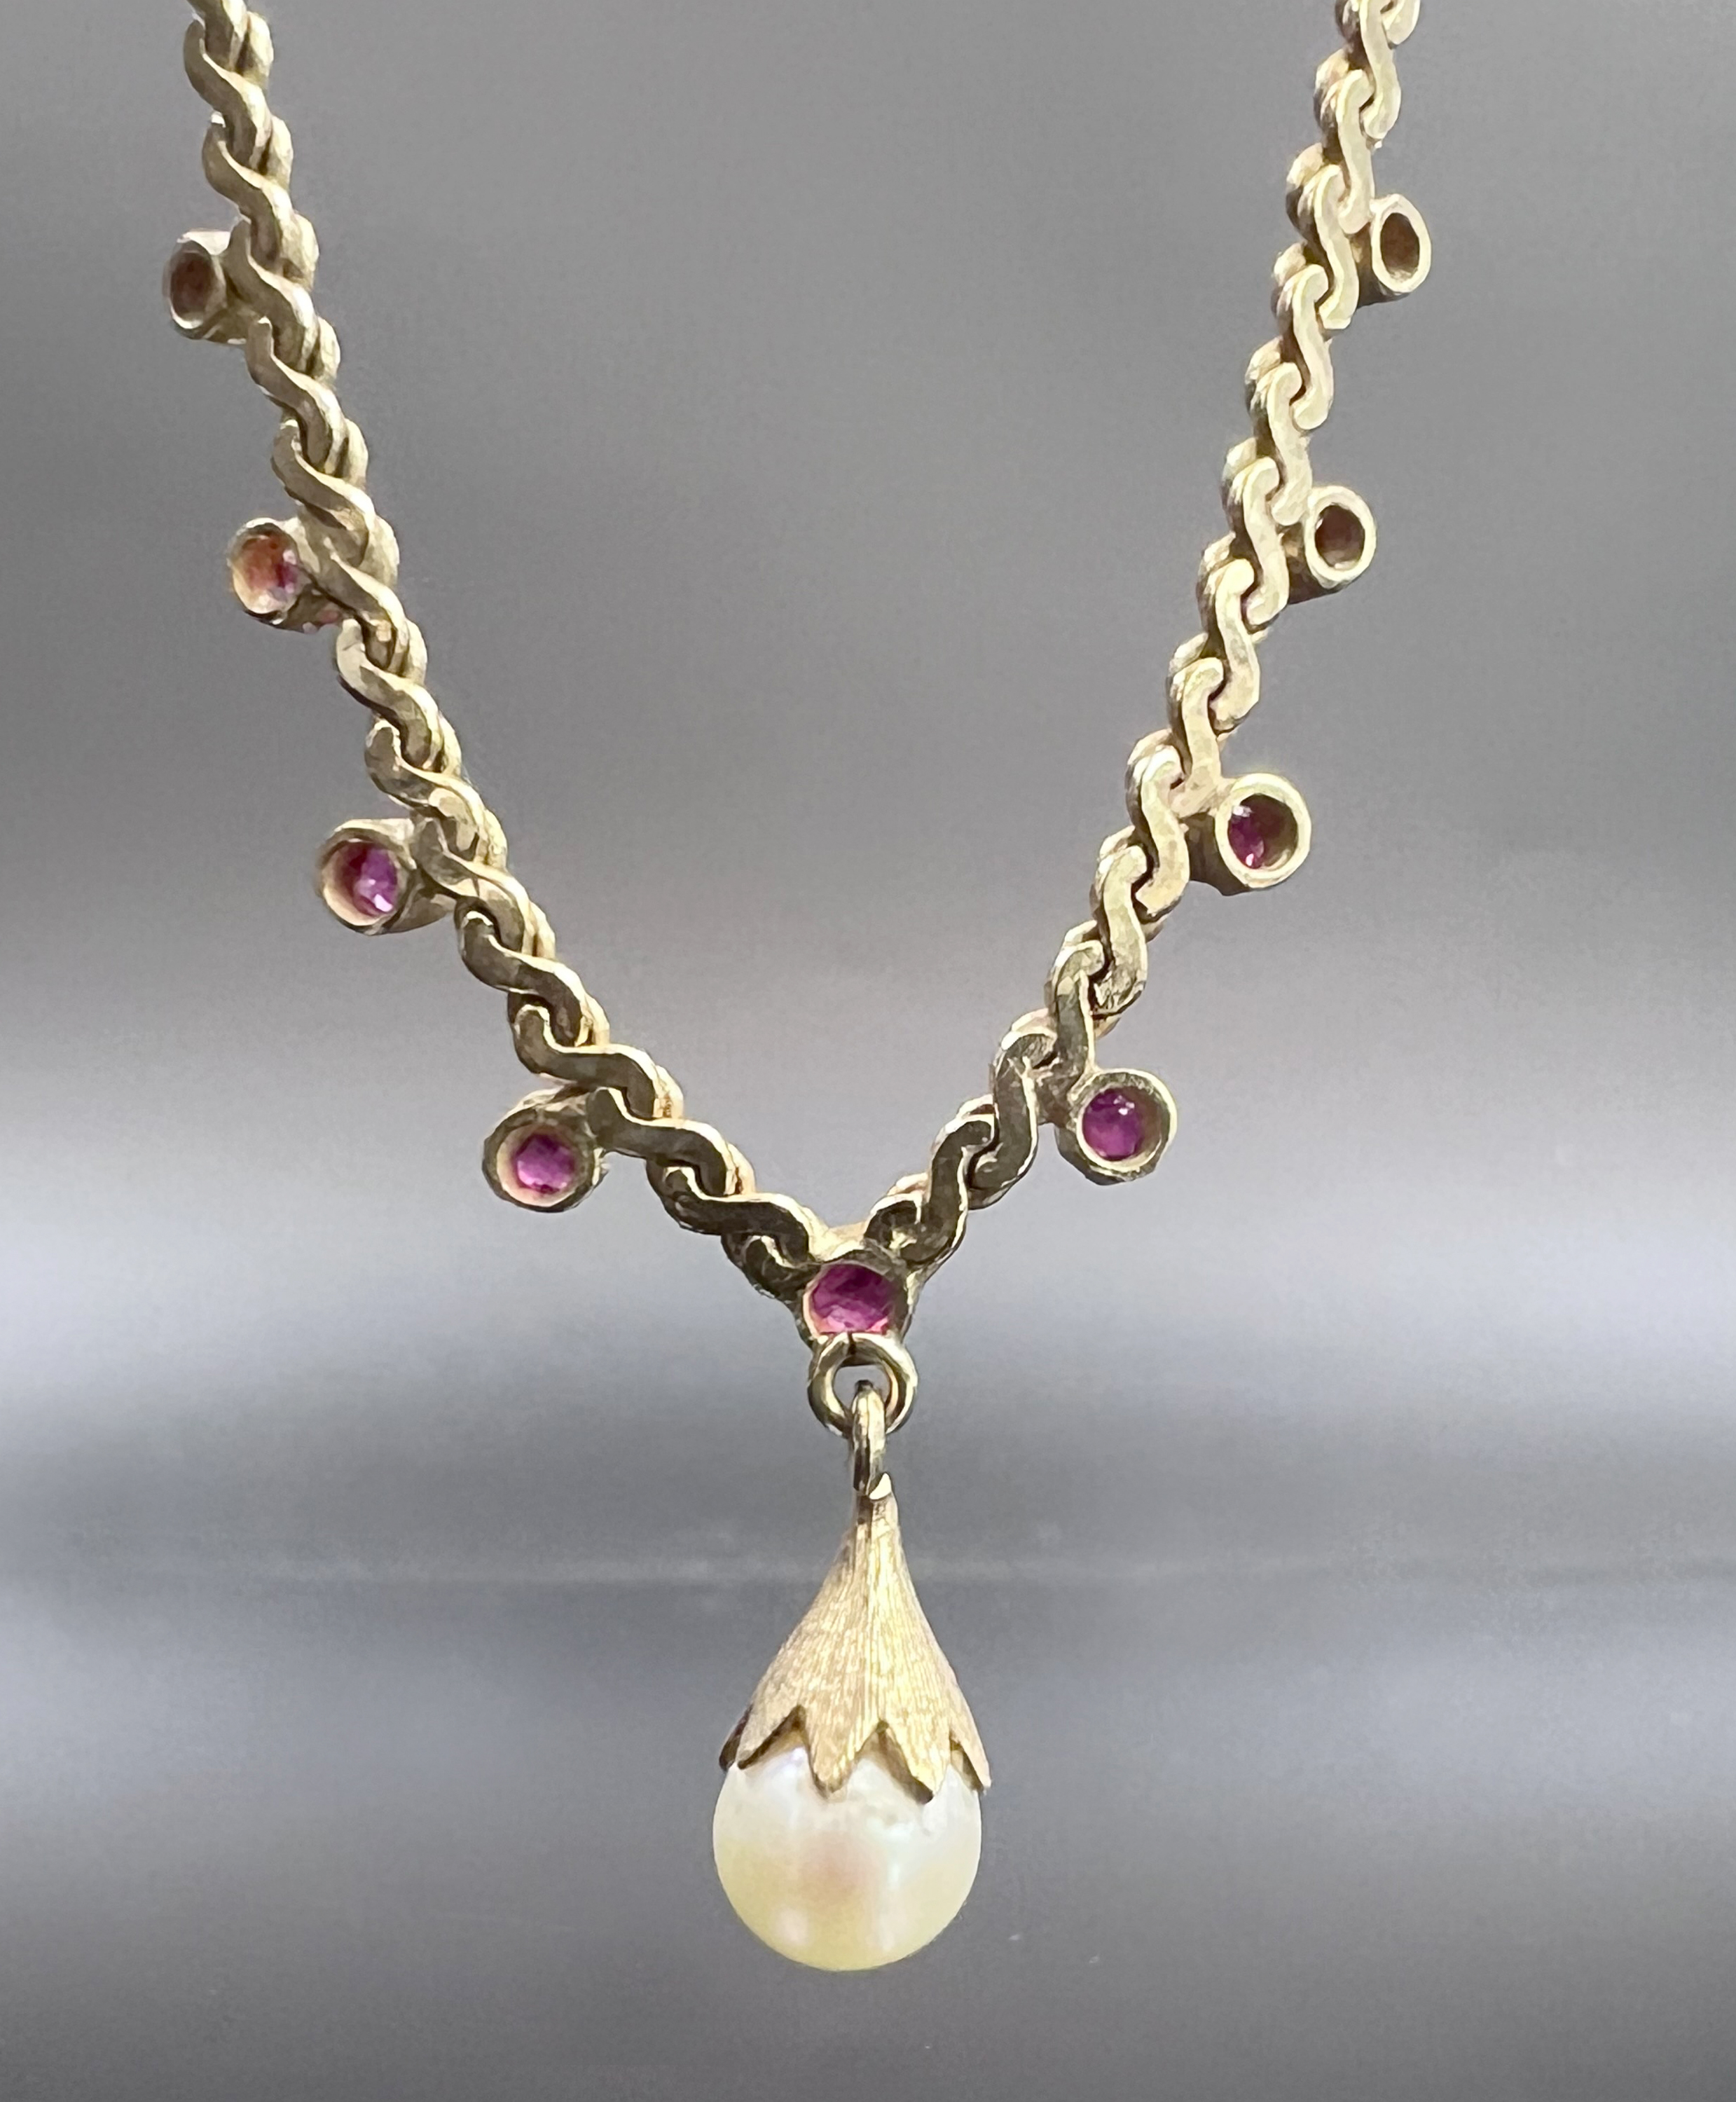 Necklace. 585 yellow gold with 9 small rubies and a pearl. - Image 2 of 5